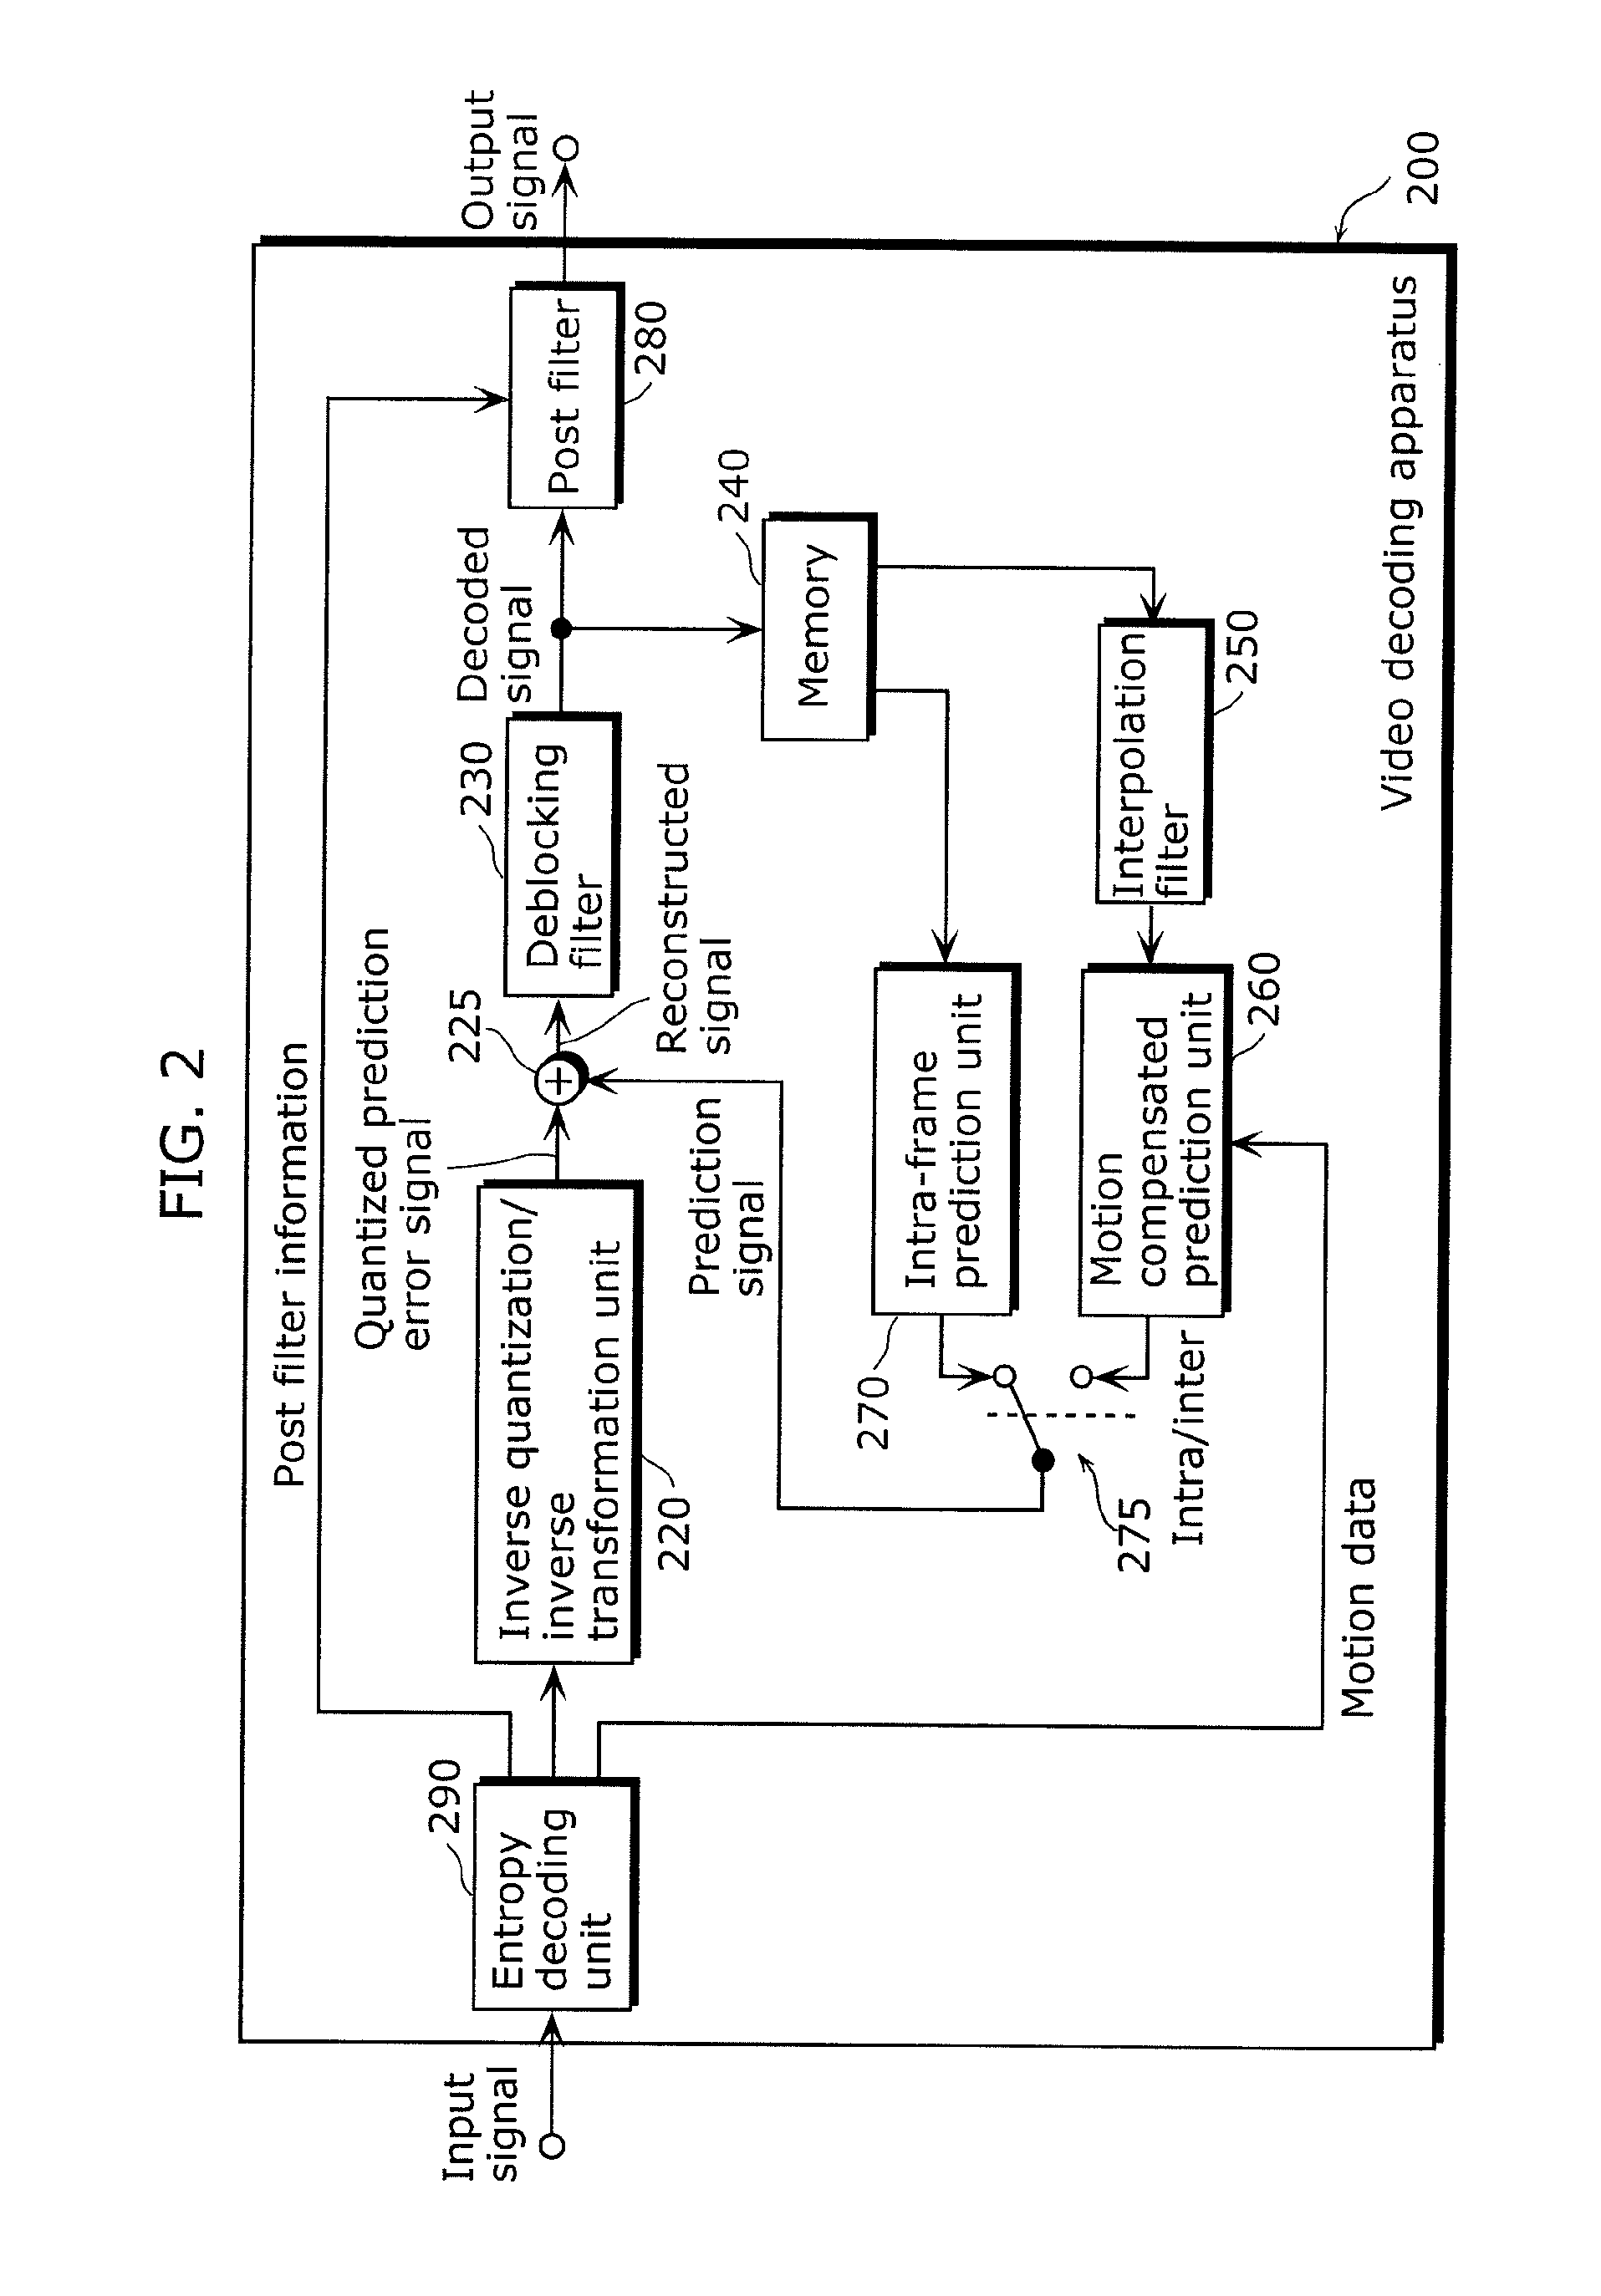 Image coding method, image decoding method, image coding apparatus, image decoding apparatus, system, program, and integrated circuit